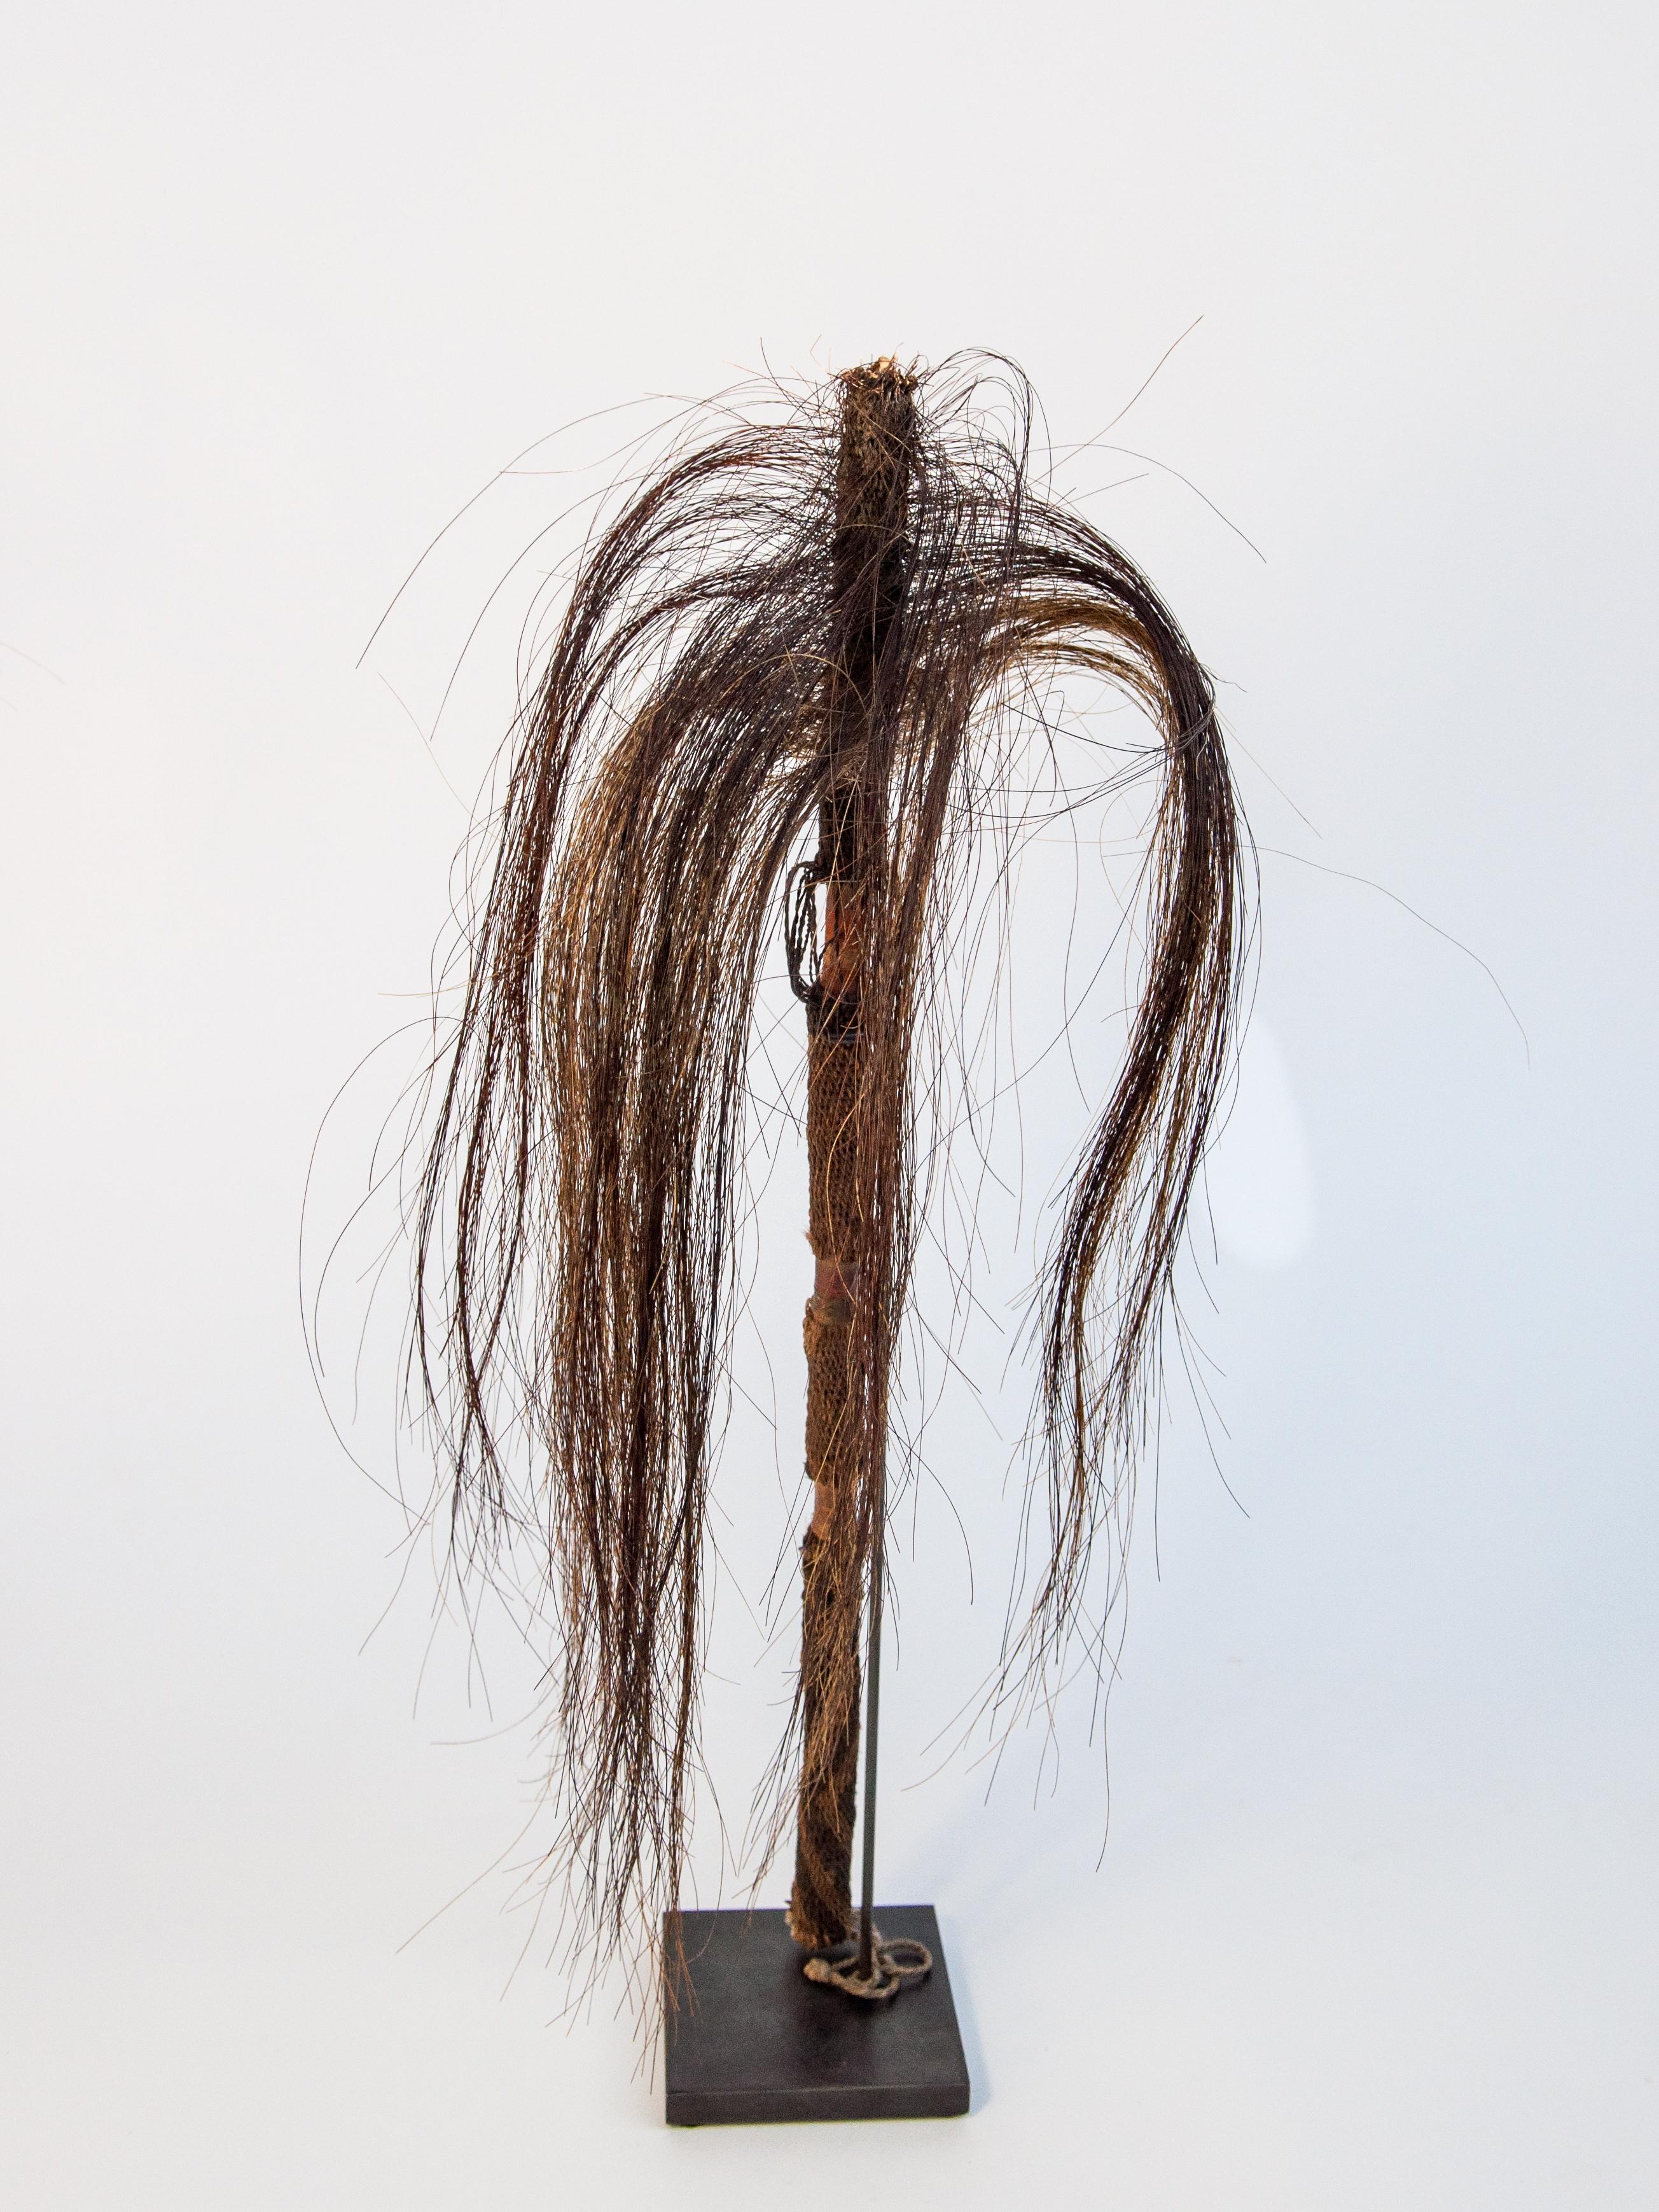 Other Pair of Horsehair Fly Whisks, Yi of Yunnan, China, Early to Mid-20th Century